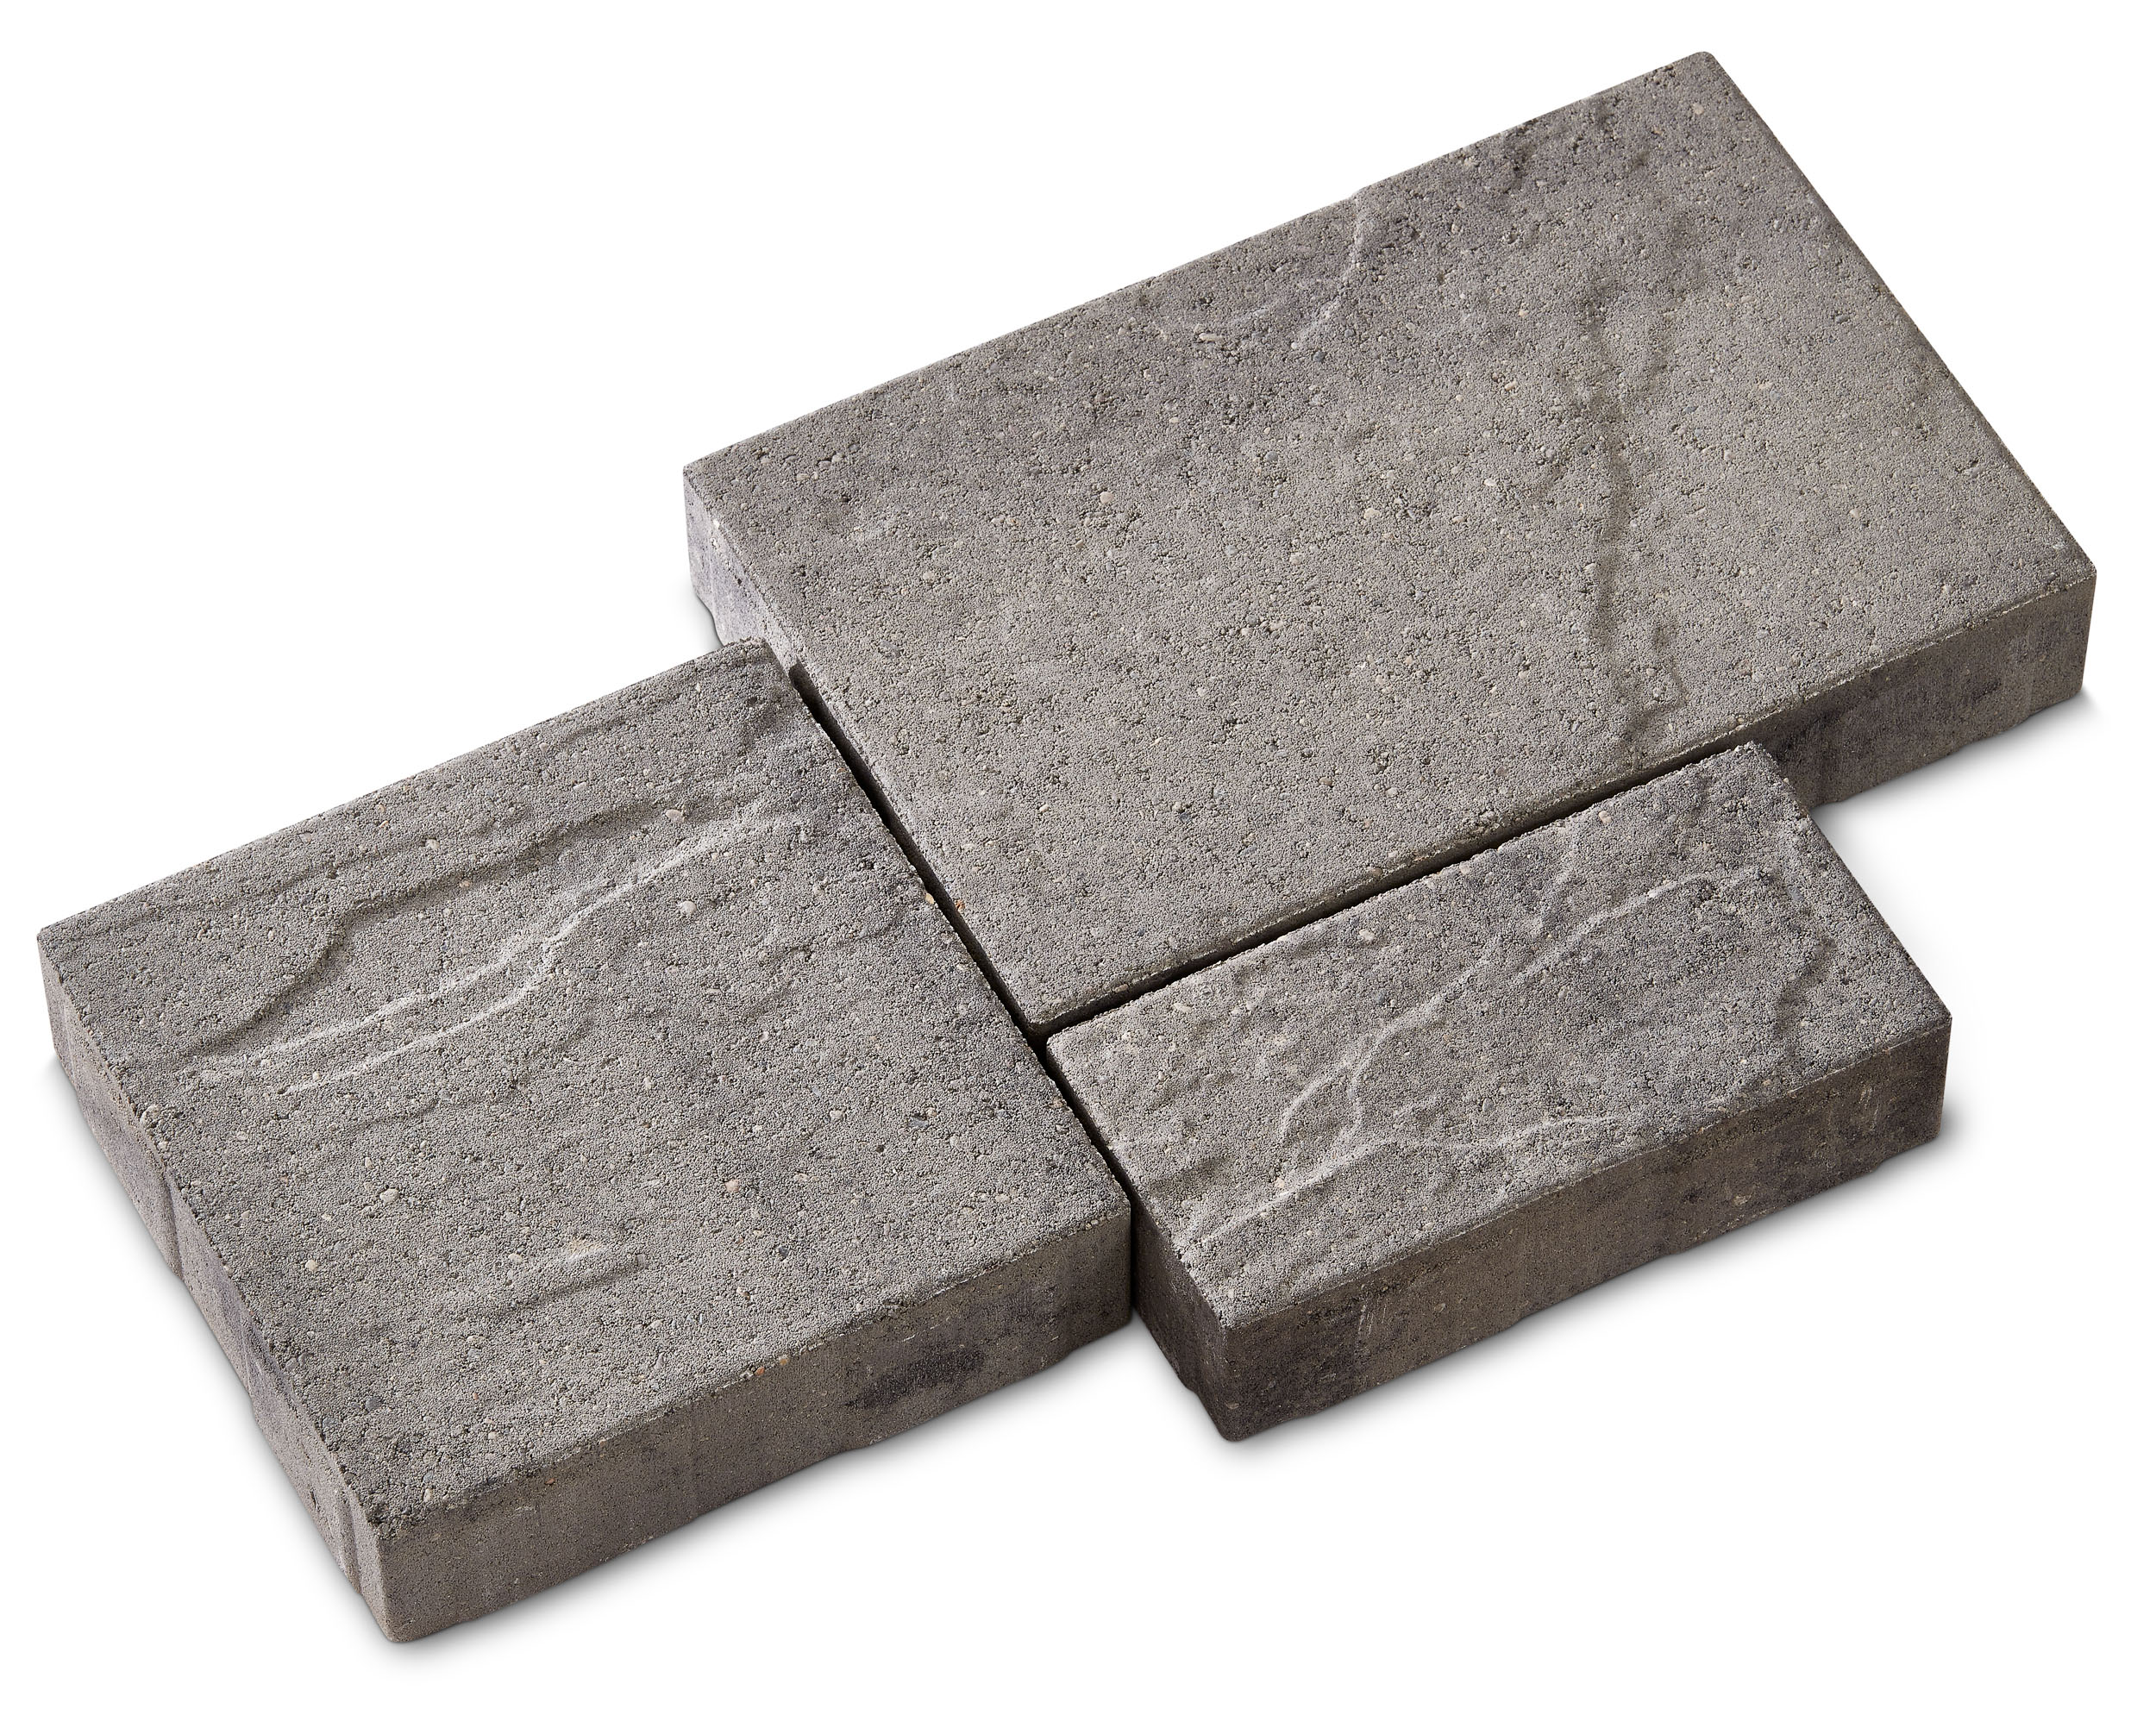 Tahoe paver product profile